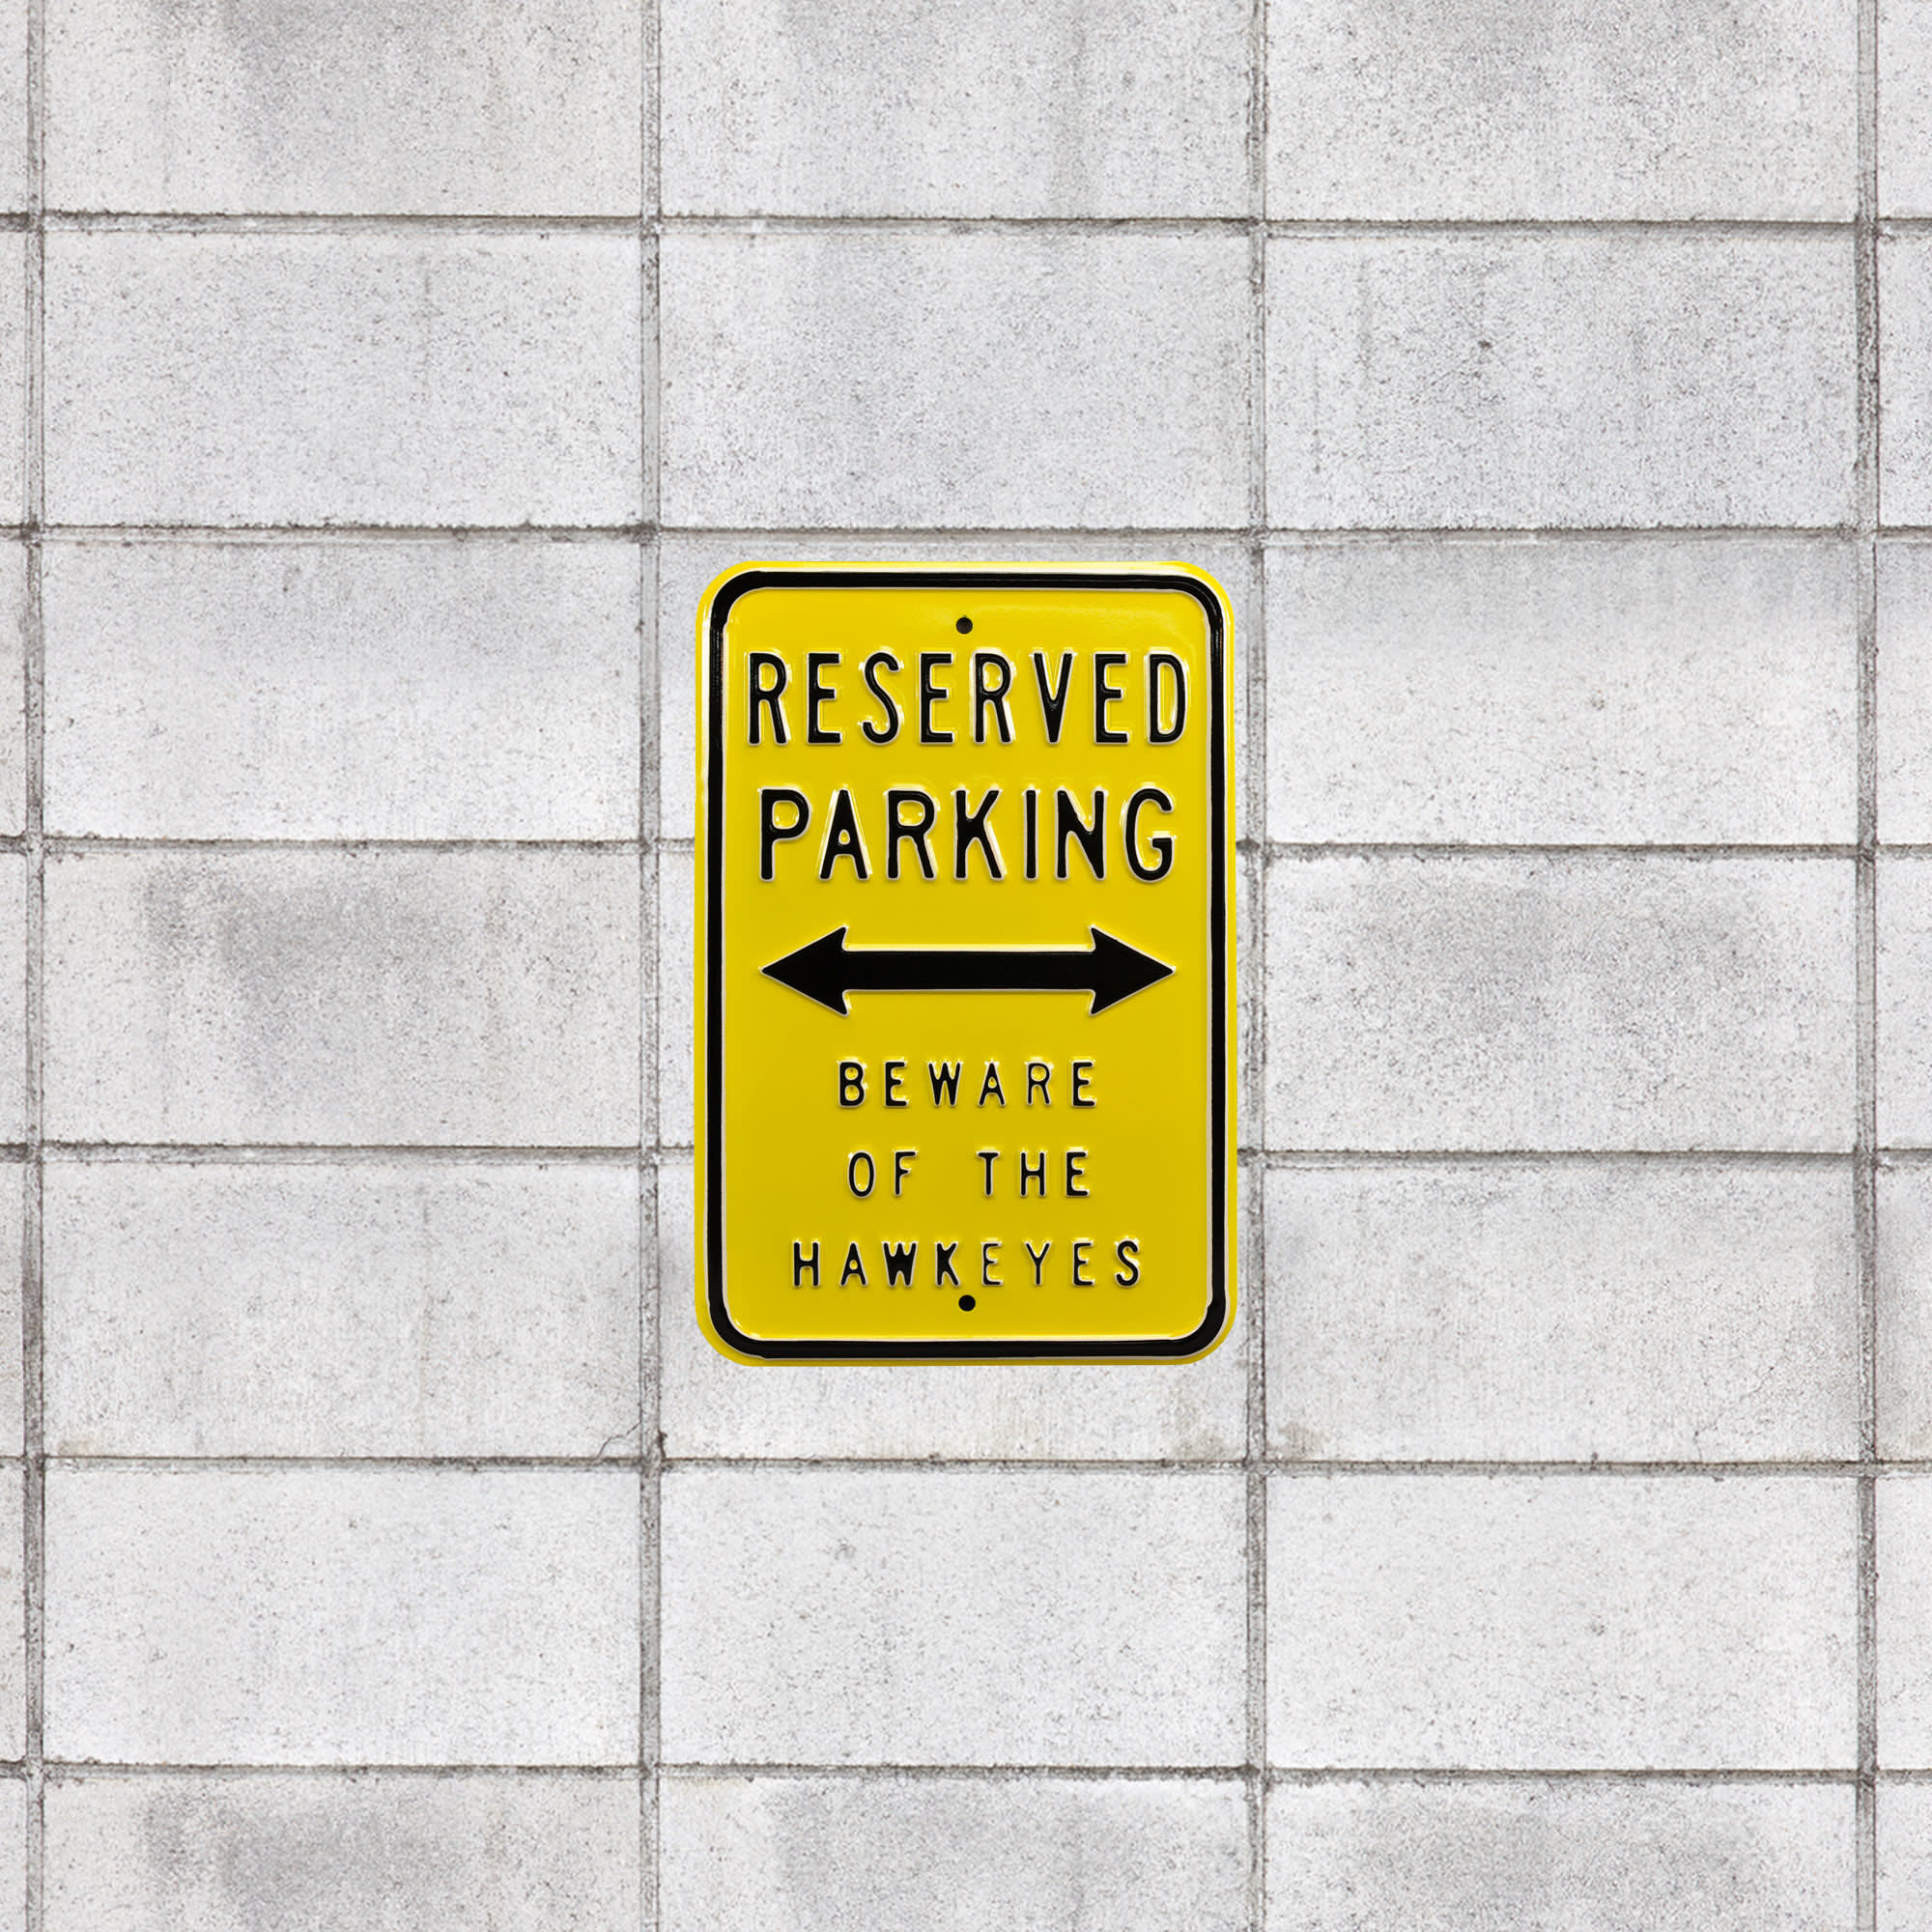 Iowa Hawkeyes: Beware Parking - Officially Licensed Metal Street Sign 18.0"W x 12.0"H by Fathead | 100% Steel